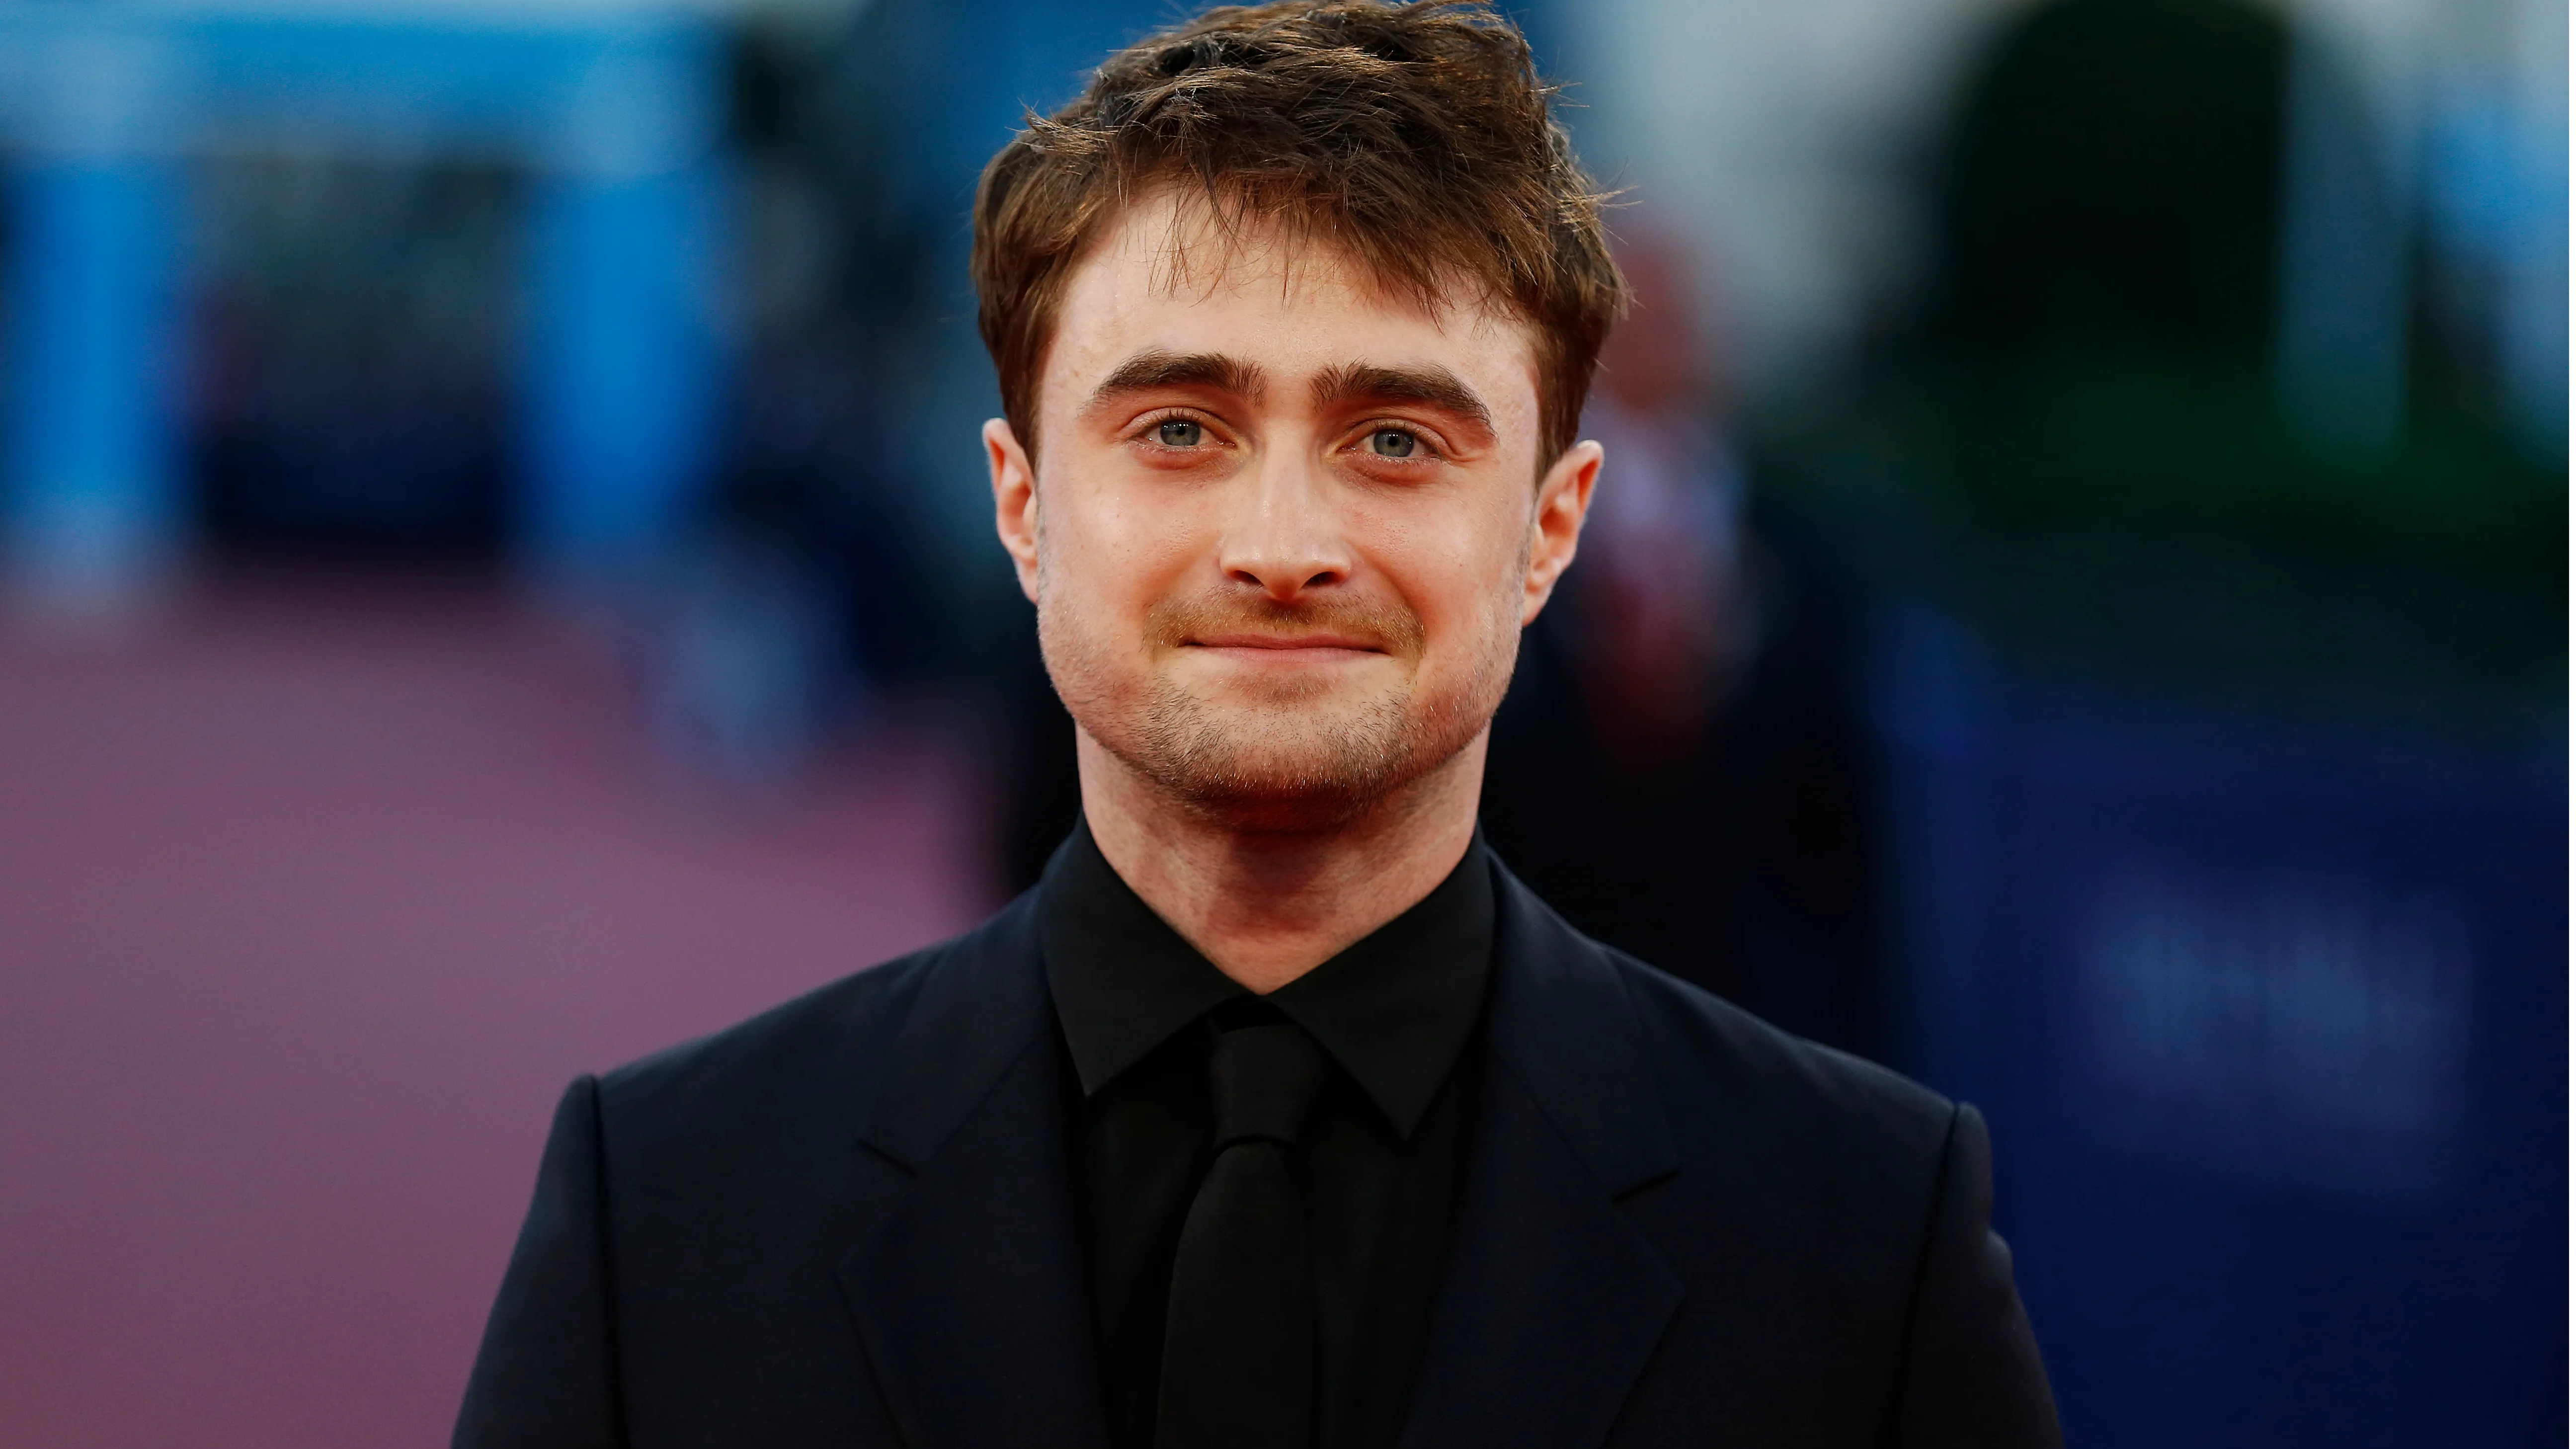 Interesting facts you didn’t know about Harry Potter movies